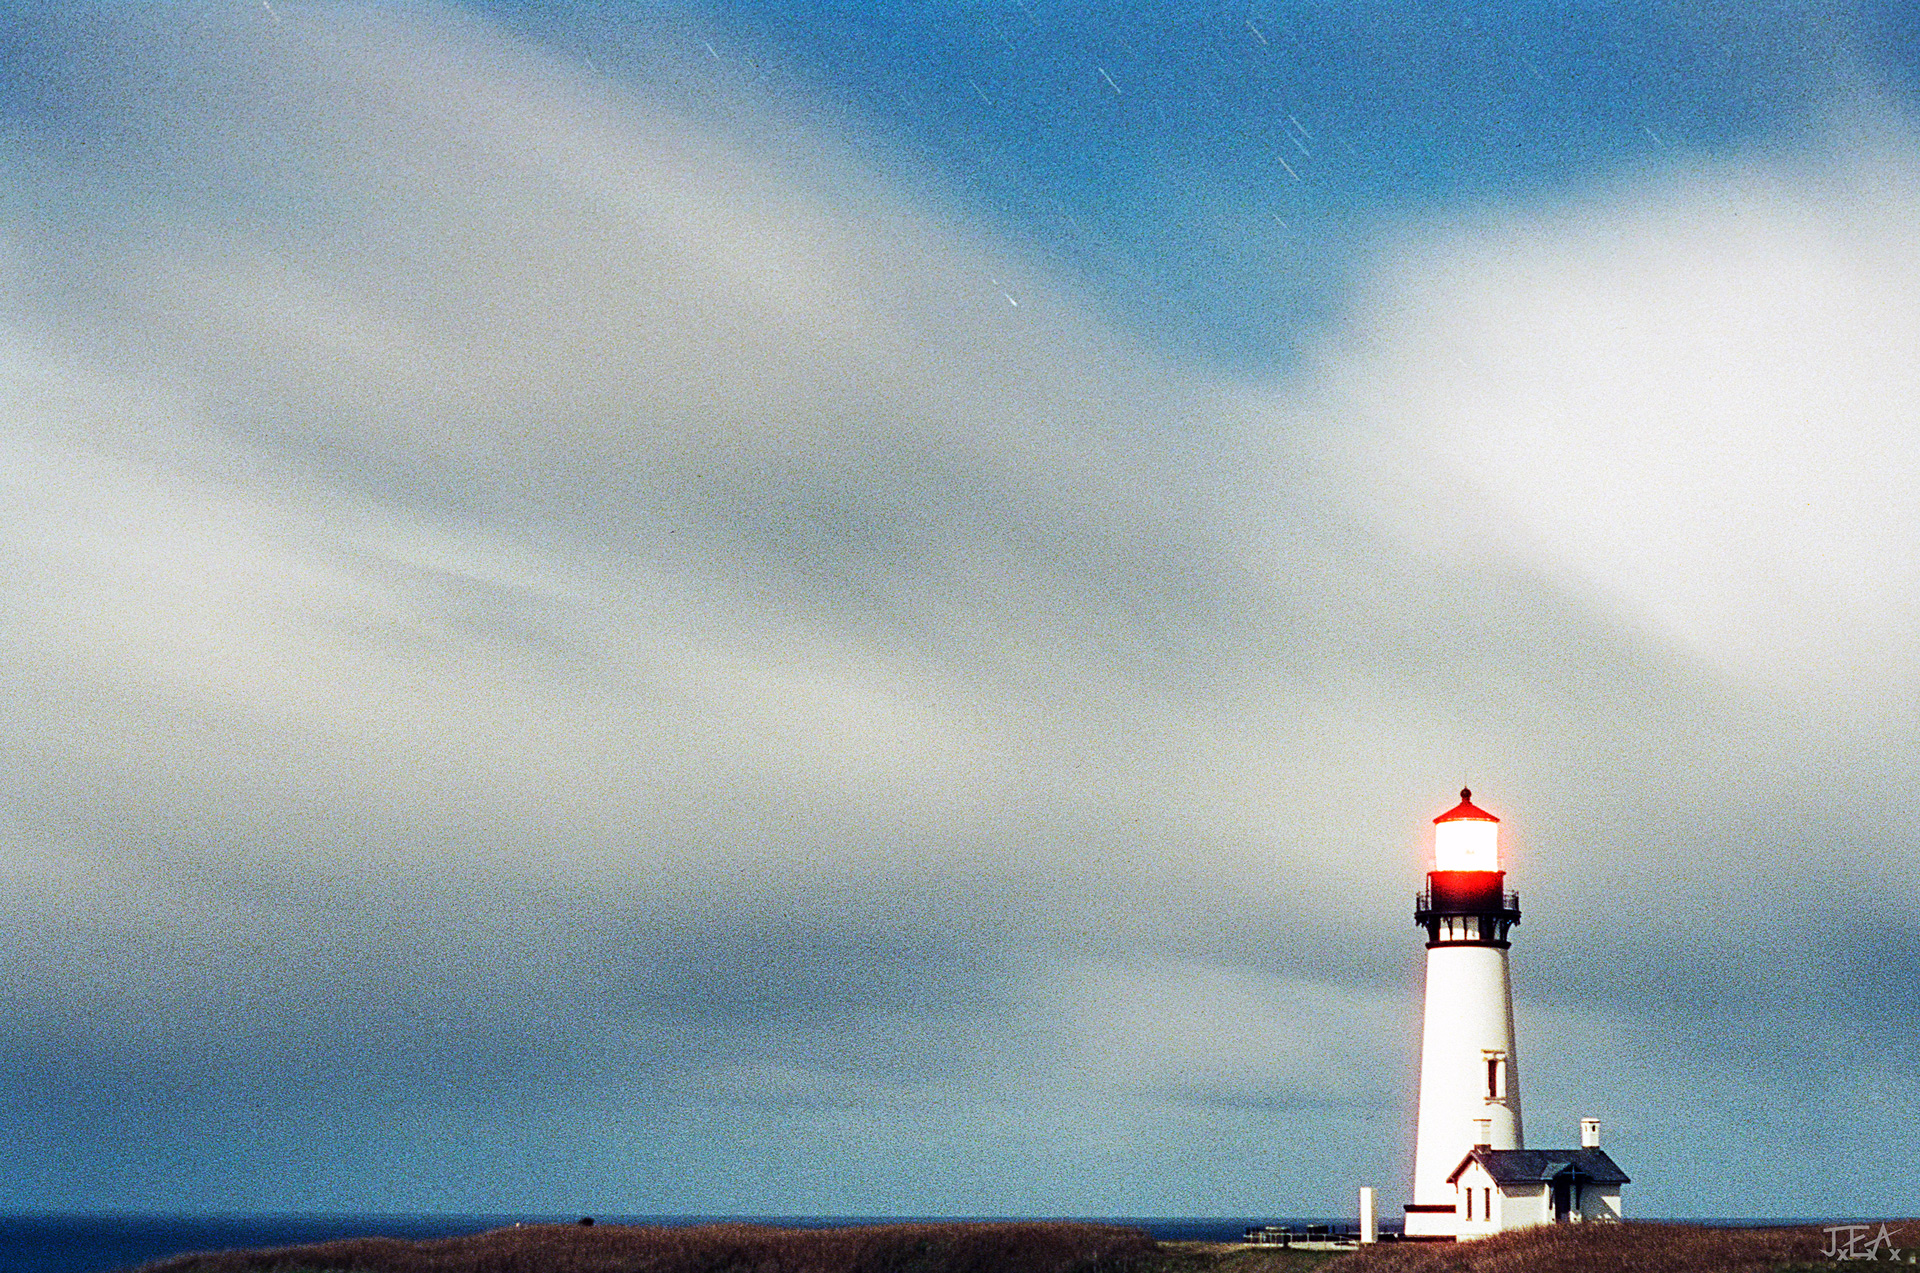 A wide angle view of the Yaquina Head Lighthouse in Newport, Oregon with an aproaching storm behind it.